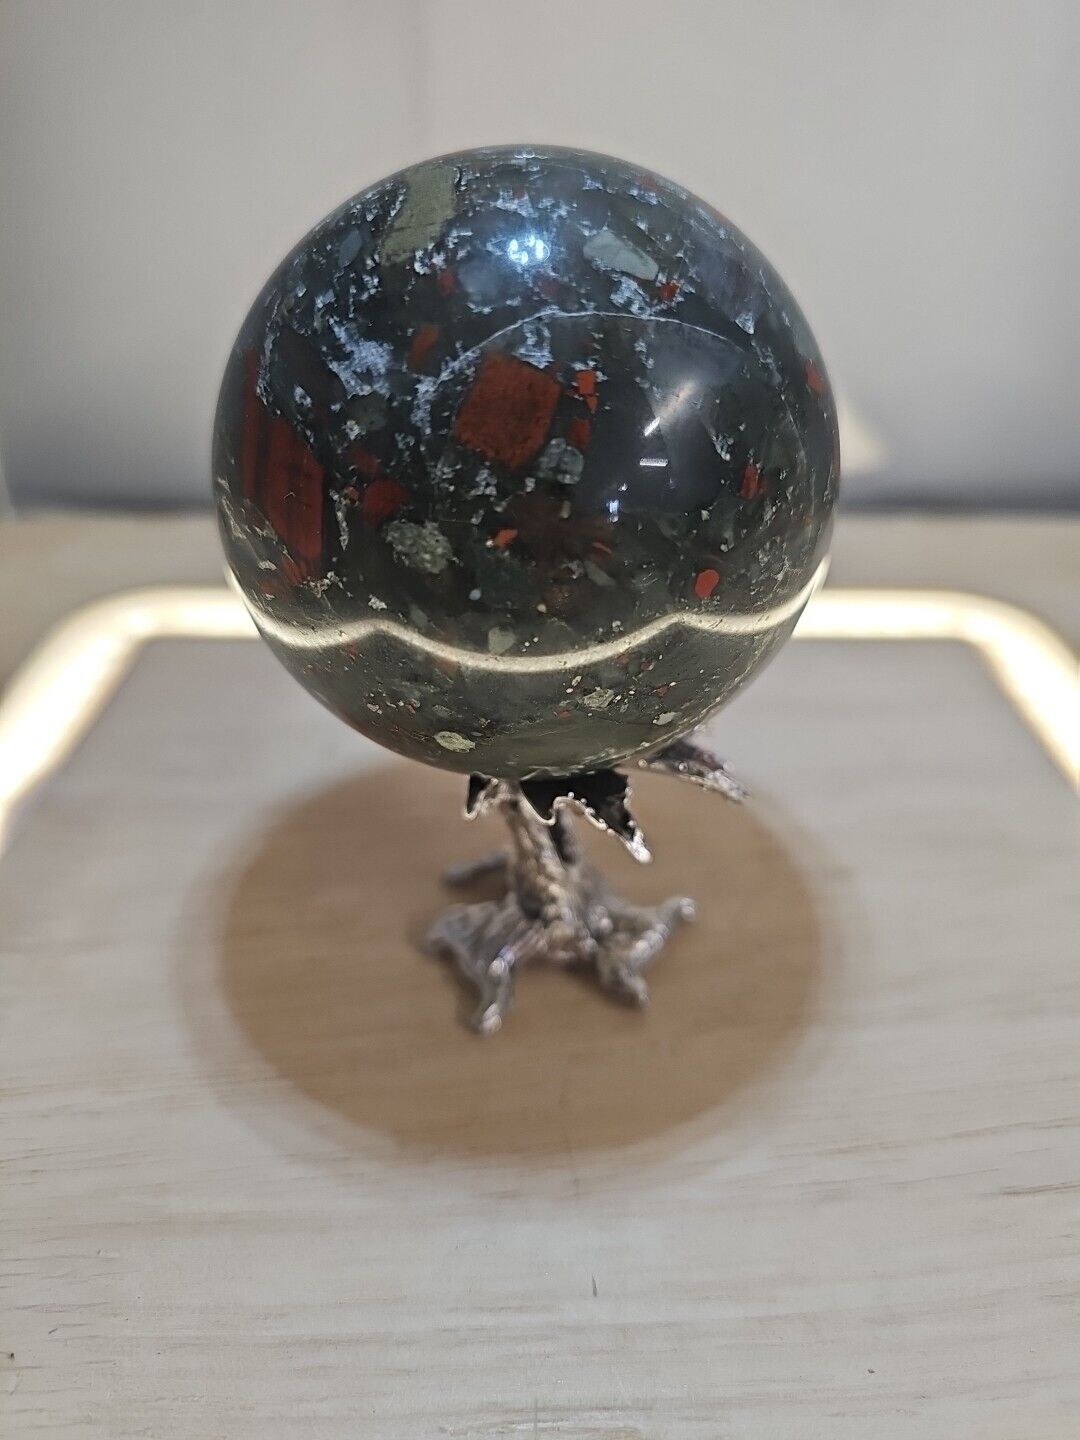 483g Natural Blood Stone Sphere Decoration Crystal Quartz  W/ Silver Stand